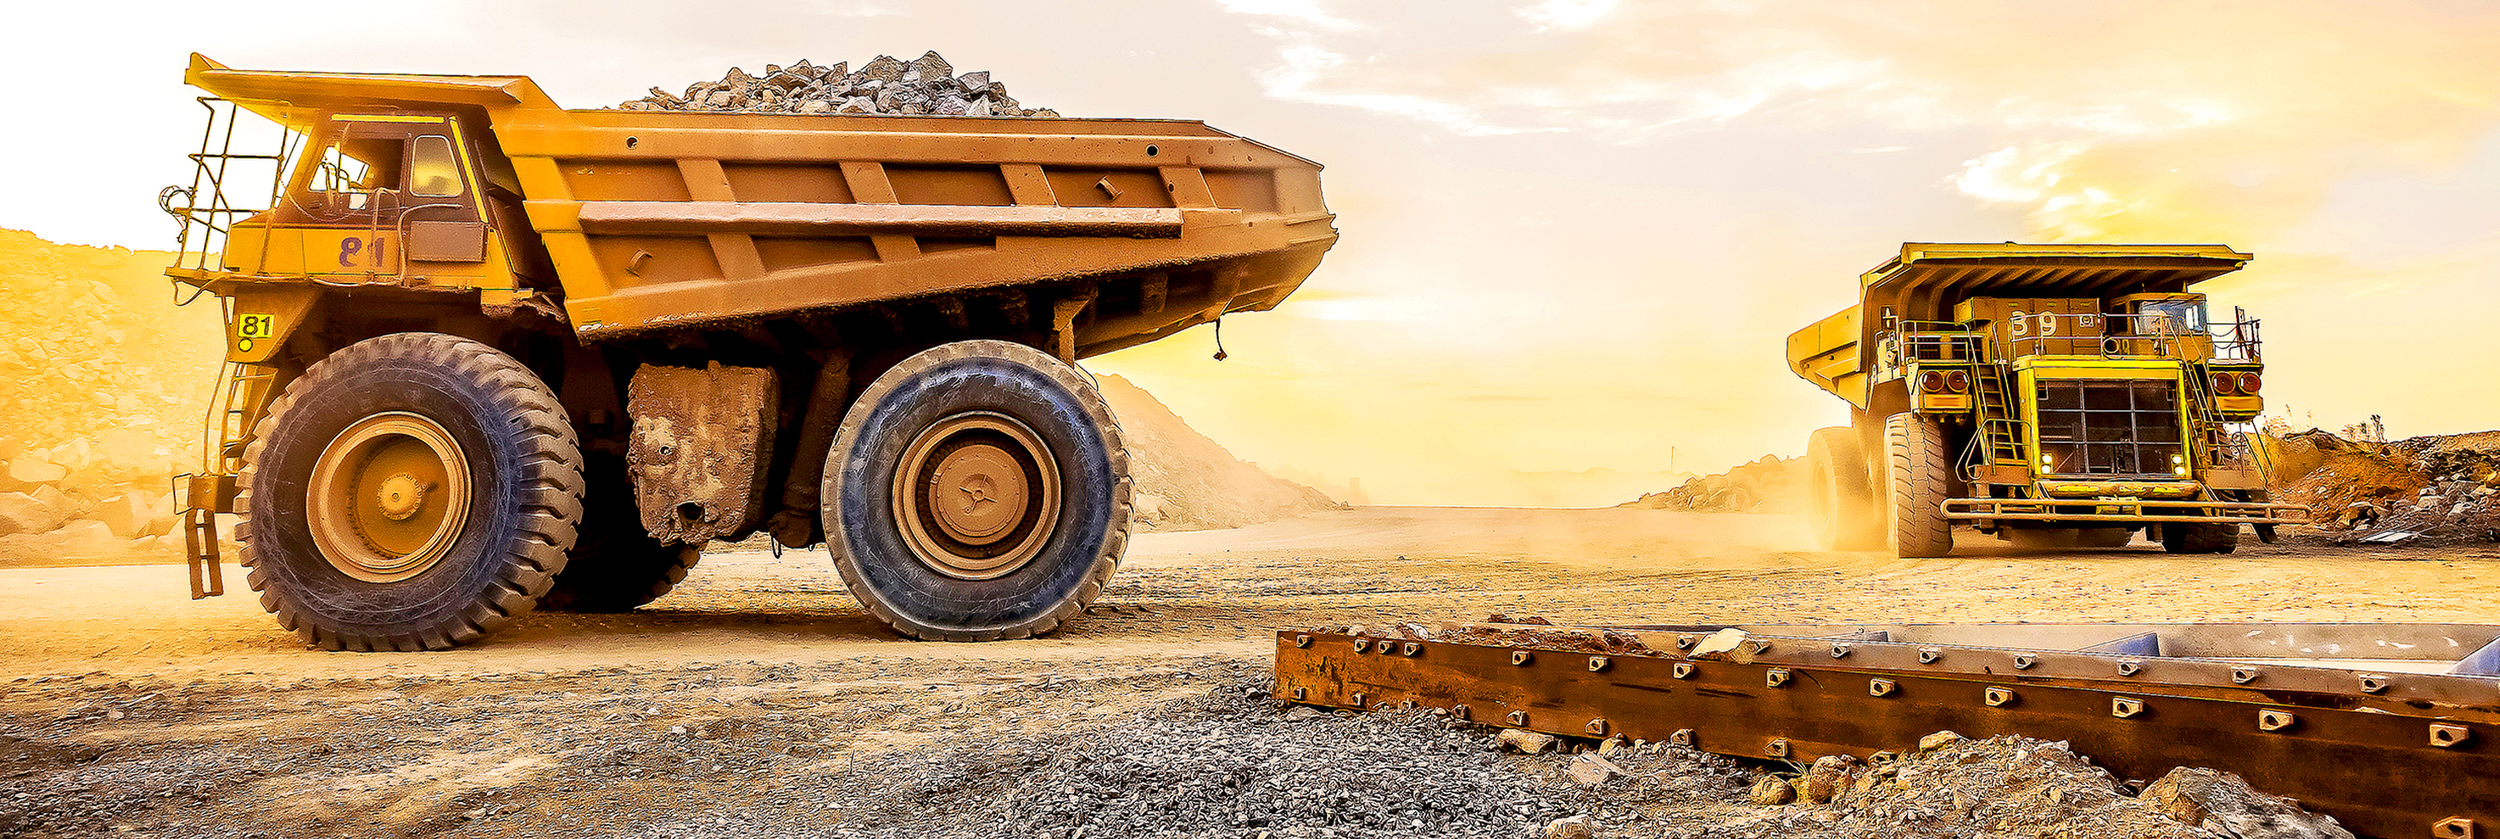 Heavy-Machinery-large-700x235.png